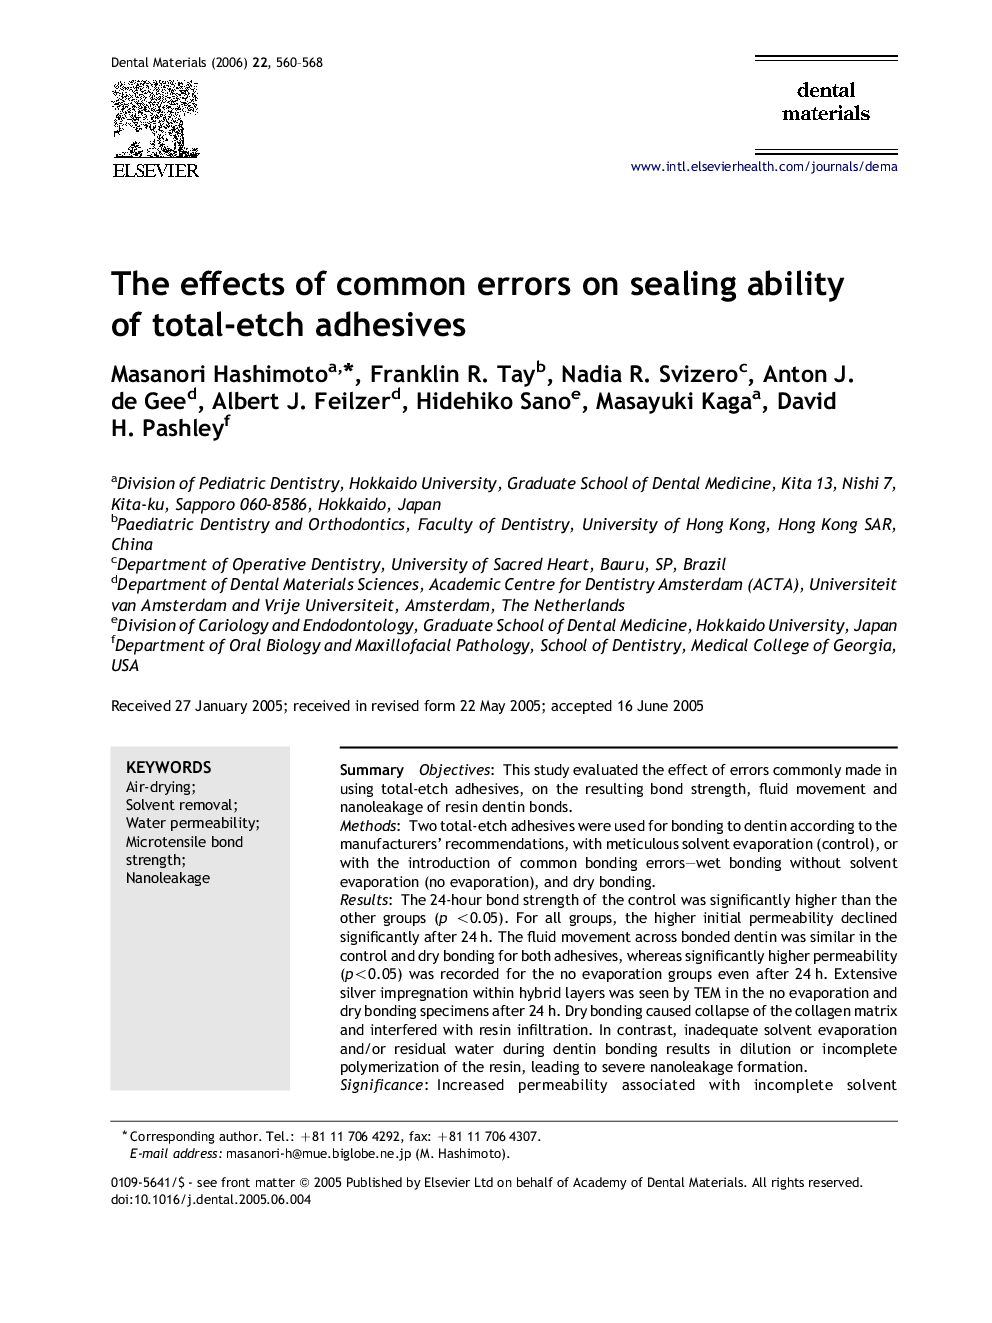 The effects of common errors on sealing ability of total-etch adhesives